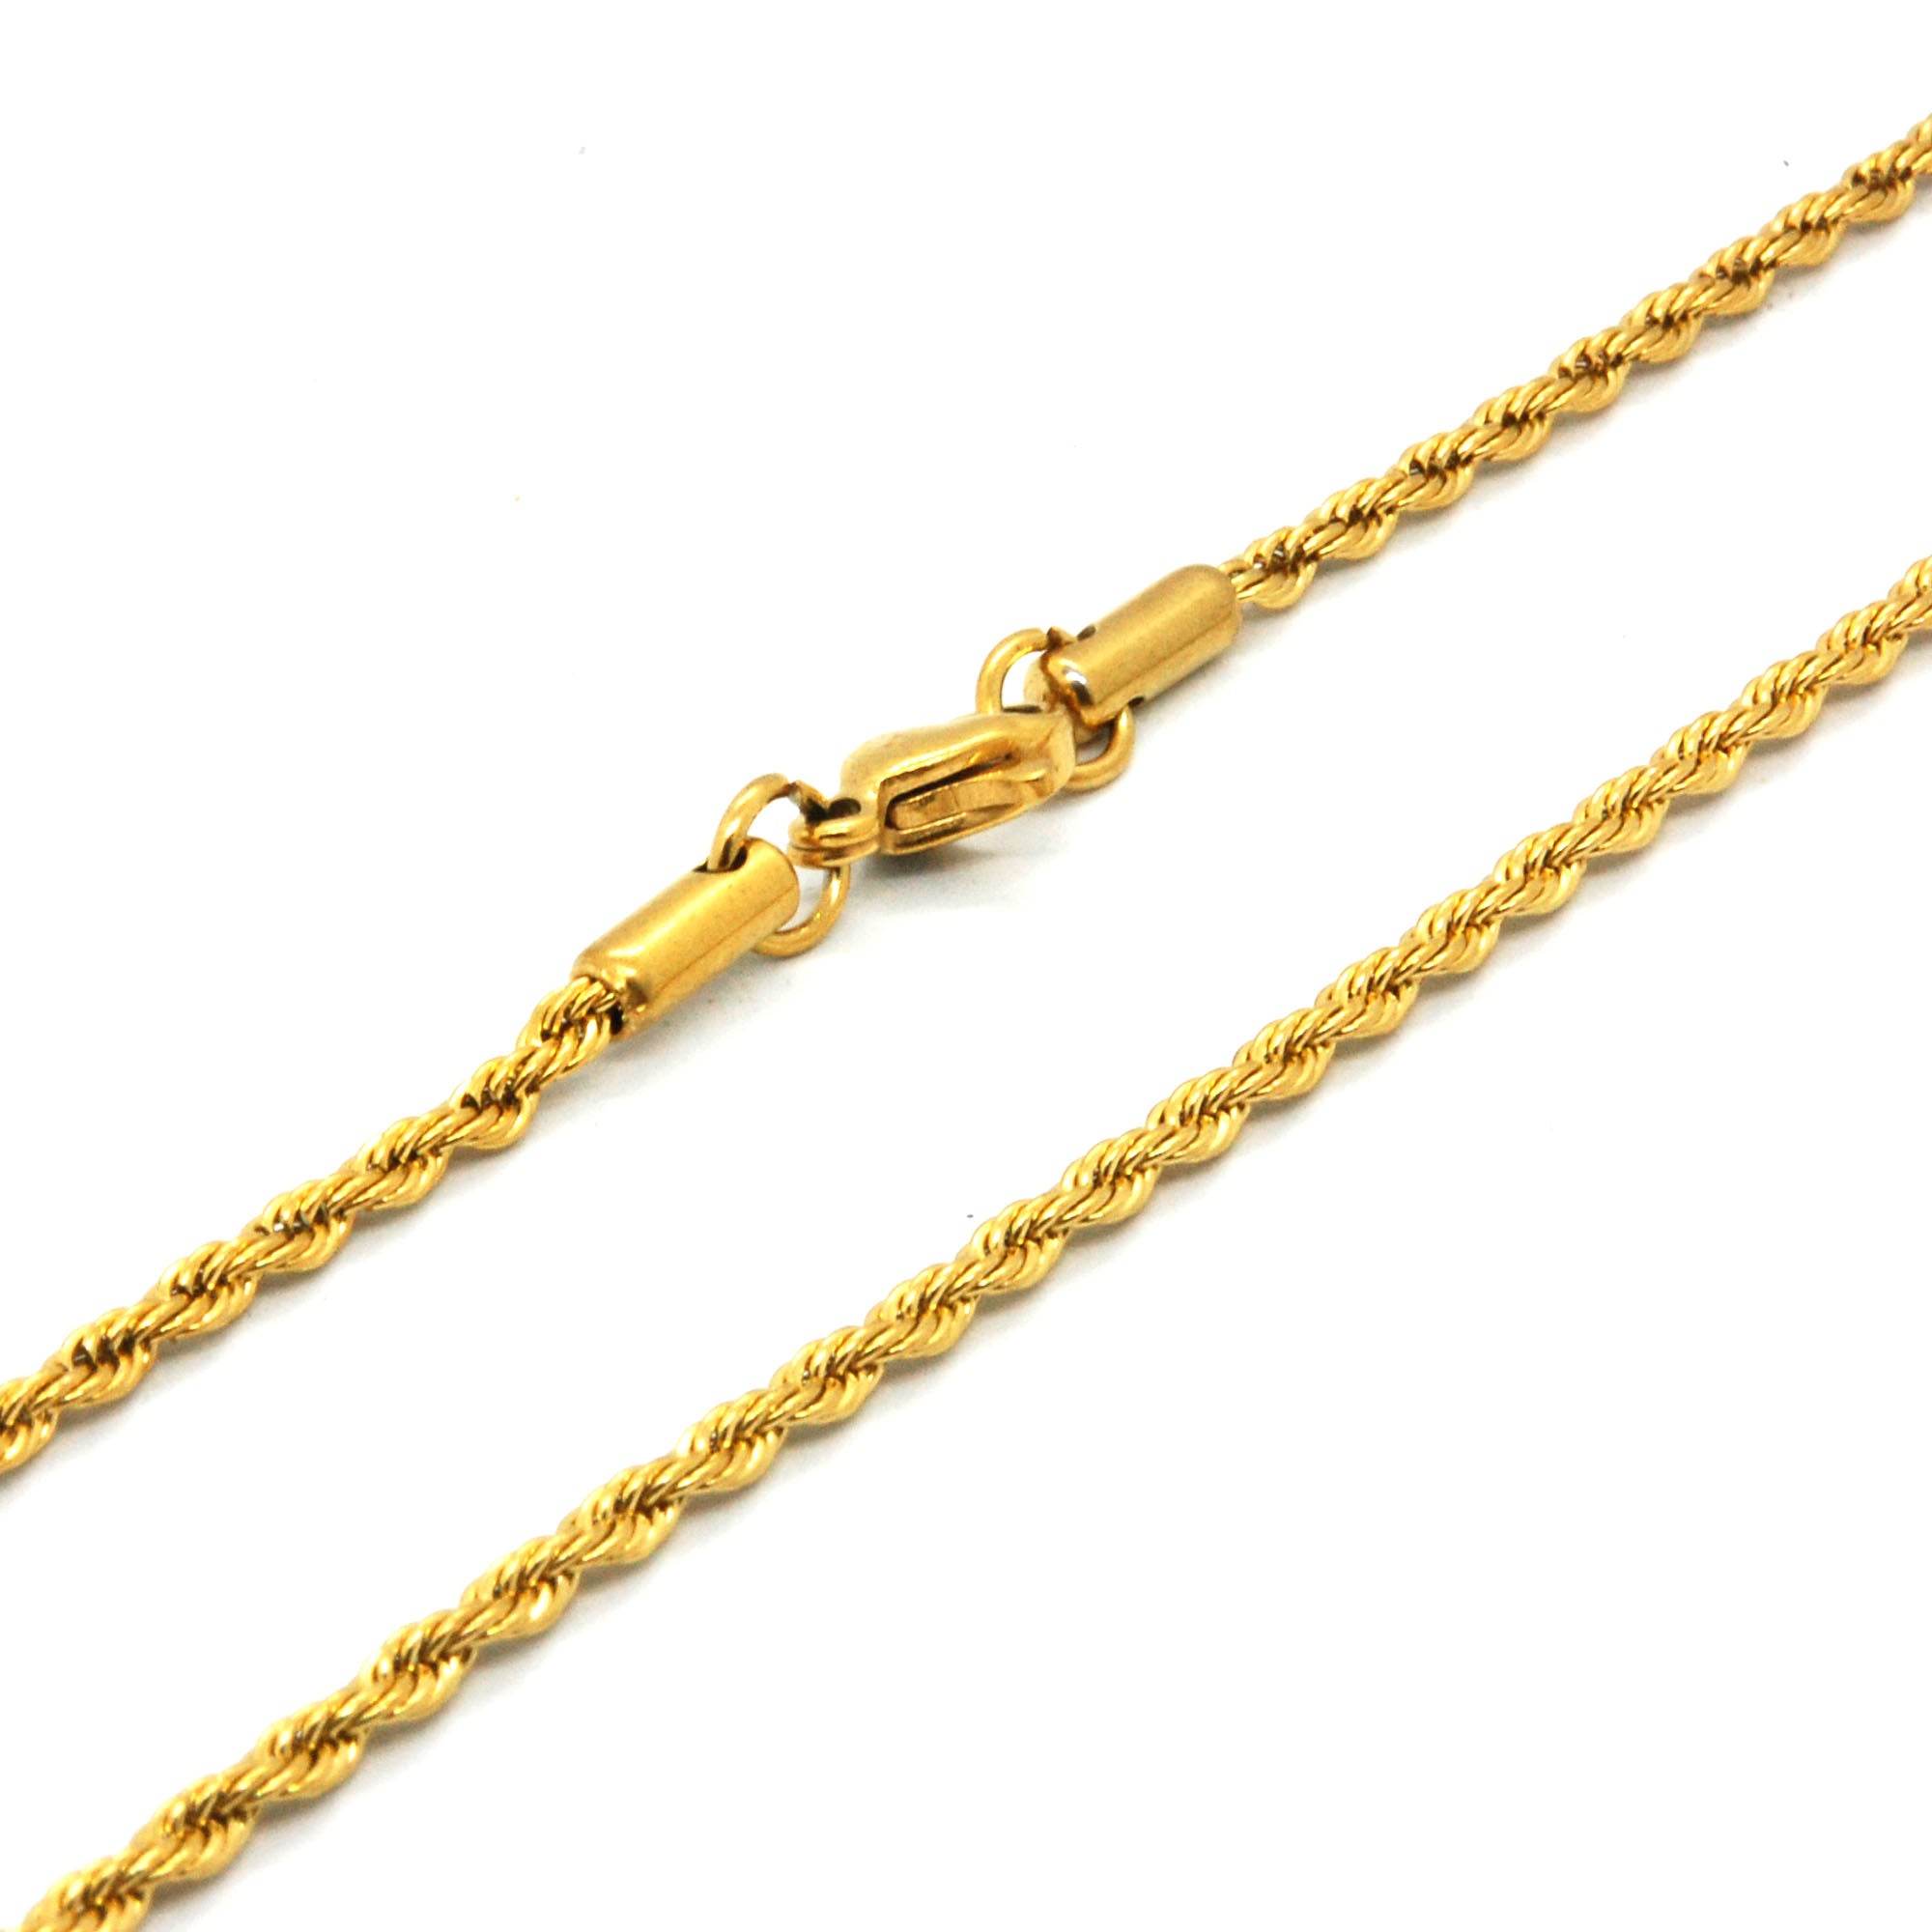 ESCH 7831: 17" Gold-Plated Twisted Rope Chain (2mm)